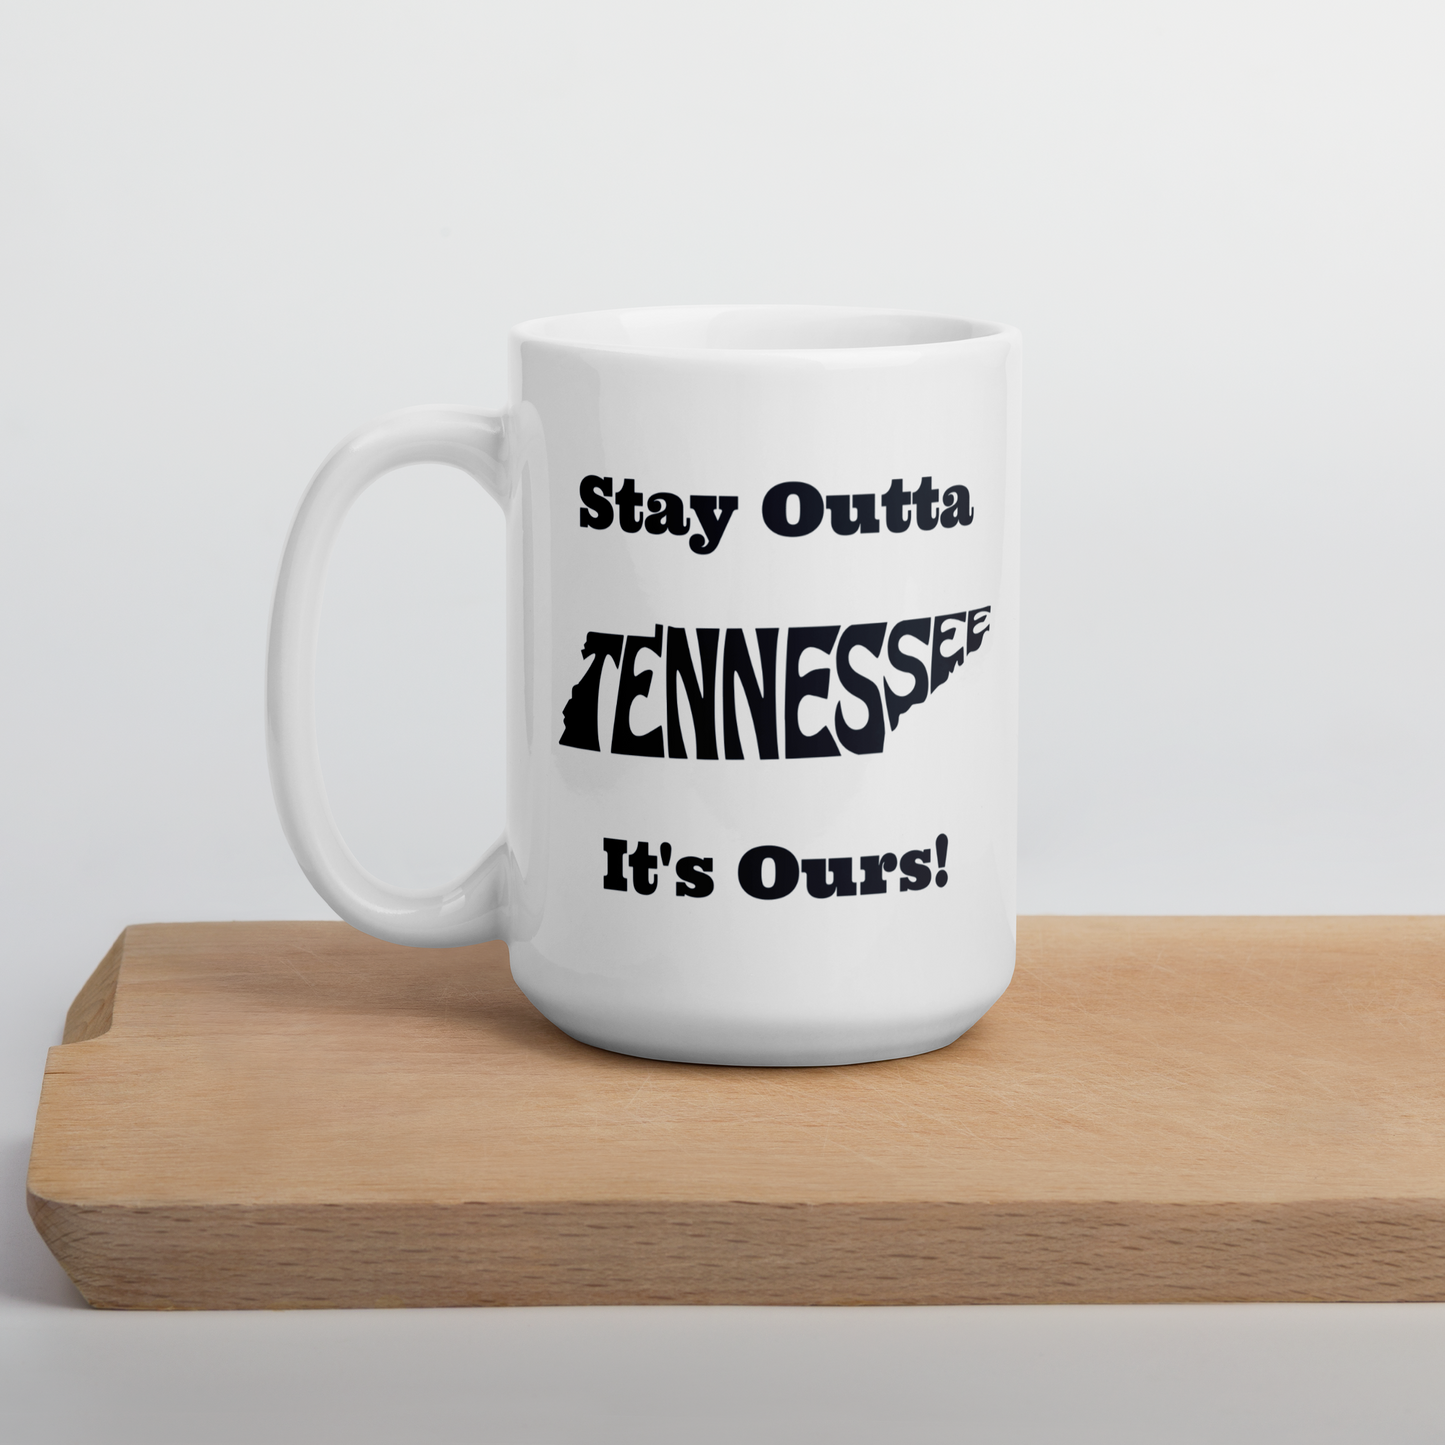 Stay Outta Tennessee - Black Font - White Glossy Mug